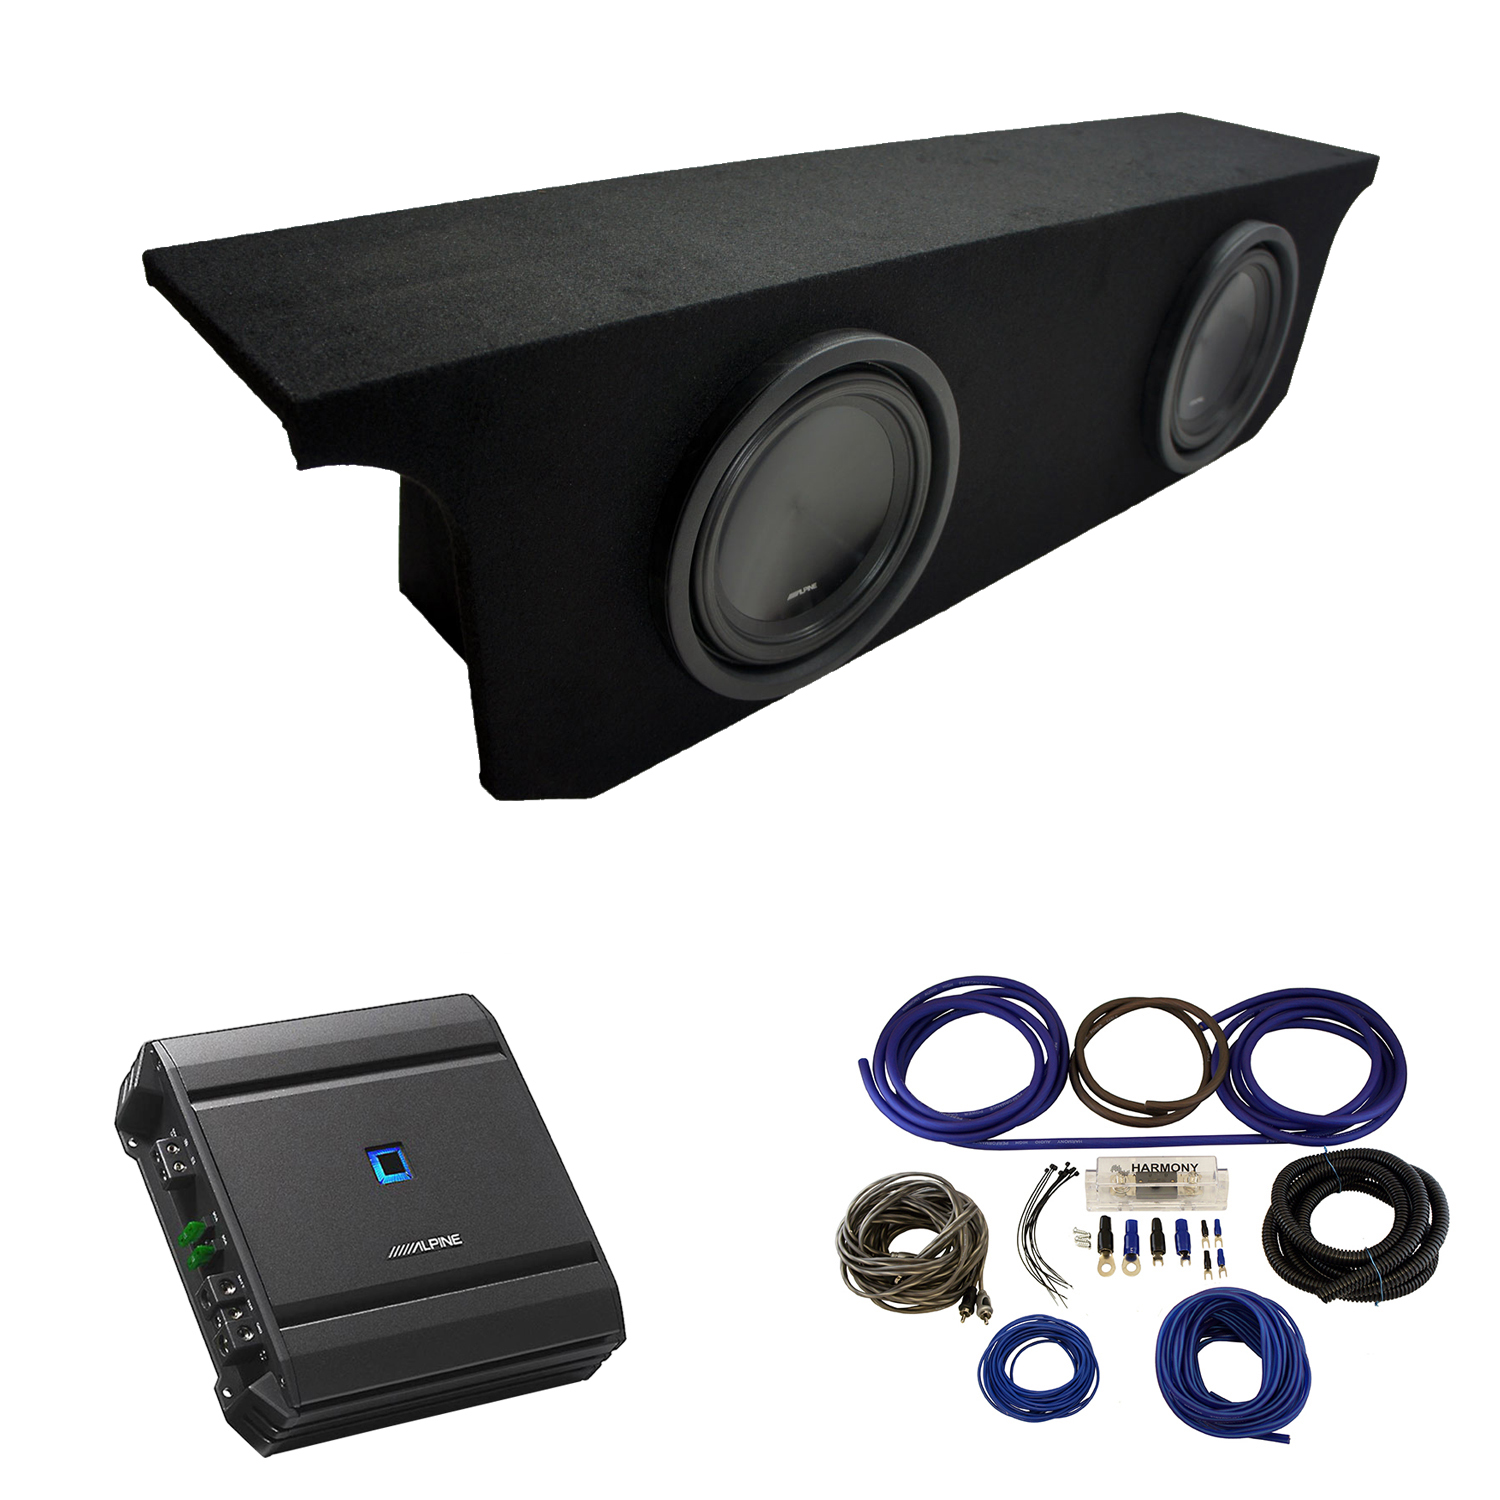 2007-2015 Jeep Wrangler JK Unlimited Alpine SWT-10S4 Dual 10" Sub Box Enclosure with S-A60M Amplifier & 4GA Amp Kit